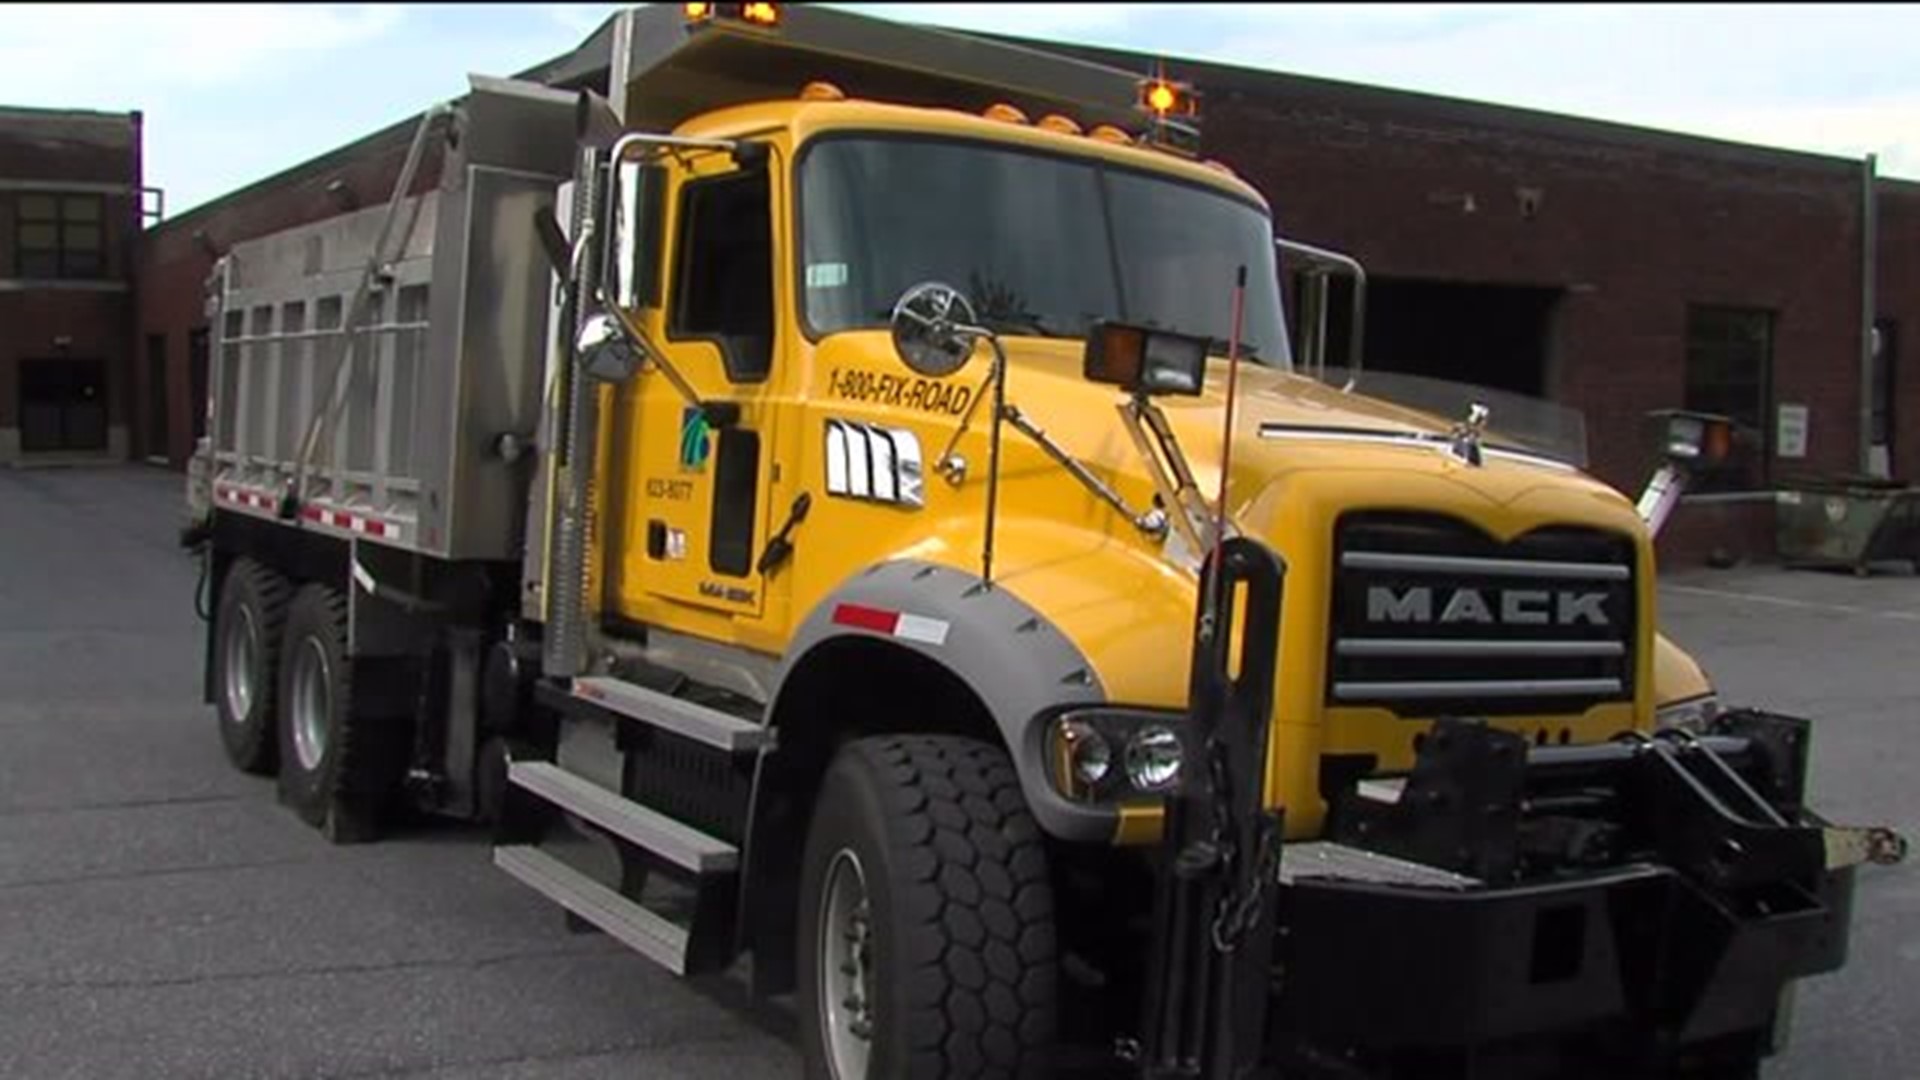 "Government that Works" tour, Governor Wolf announces expanded plow-truck tracking technology